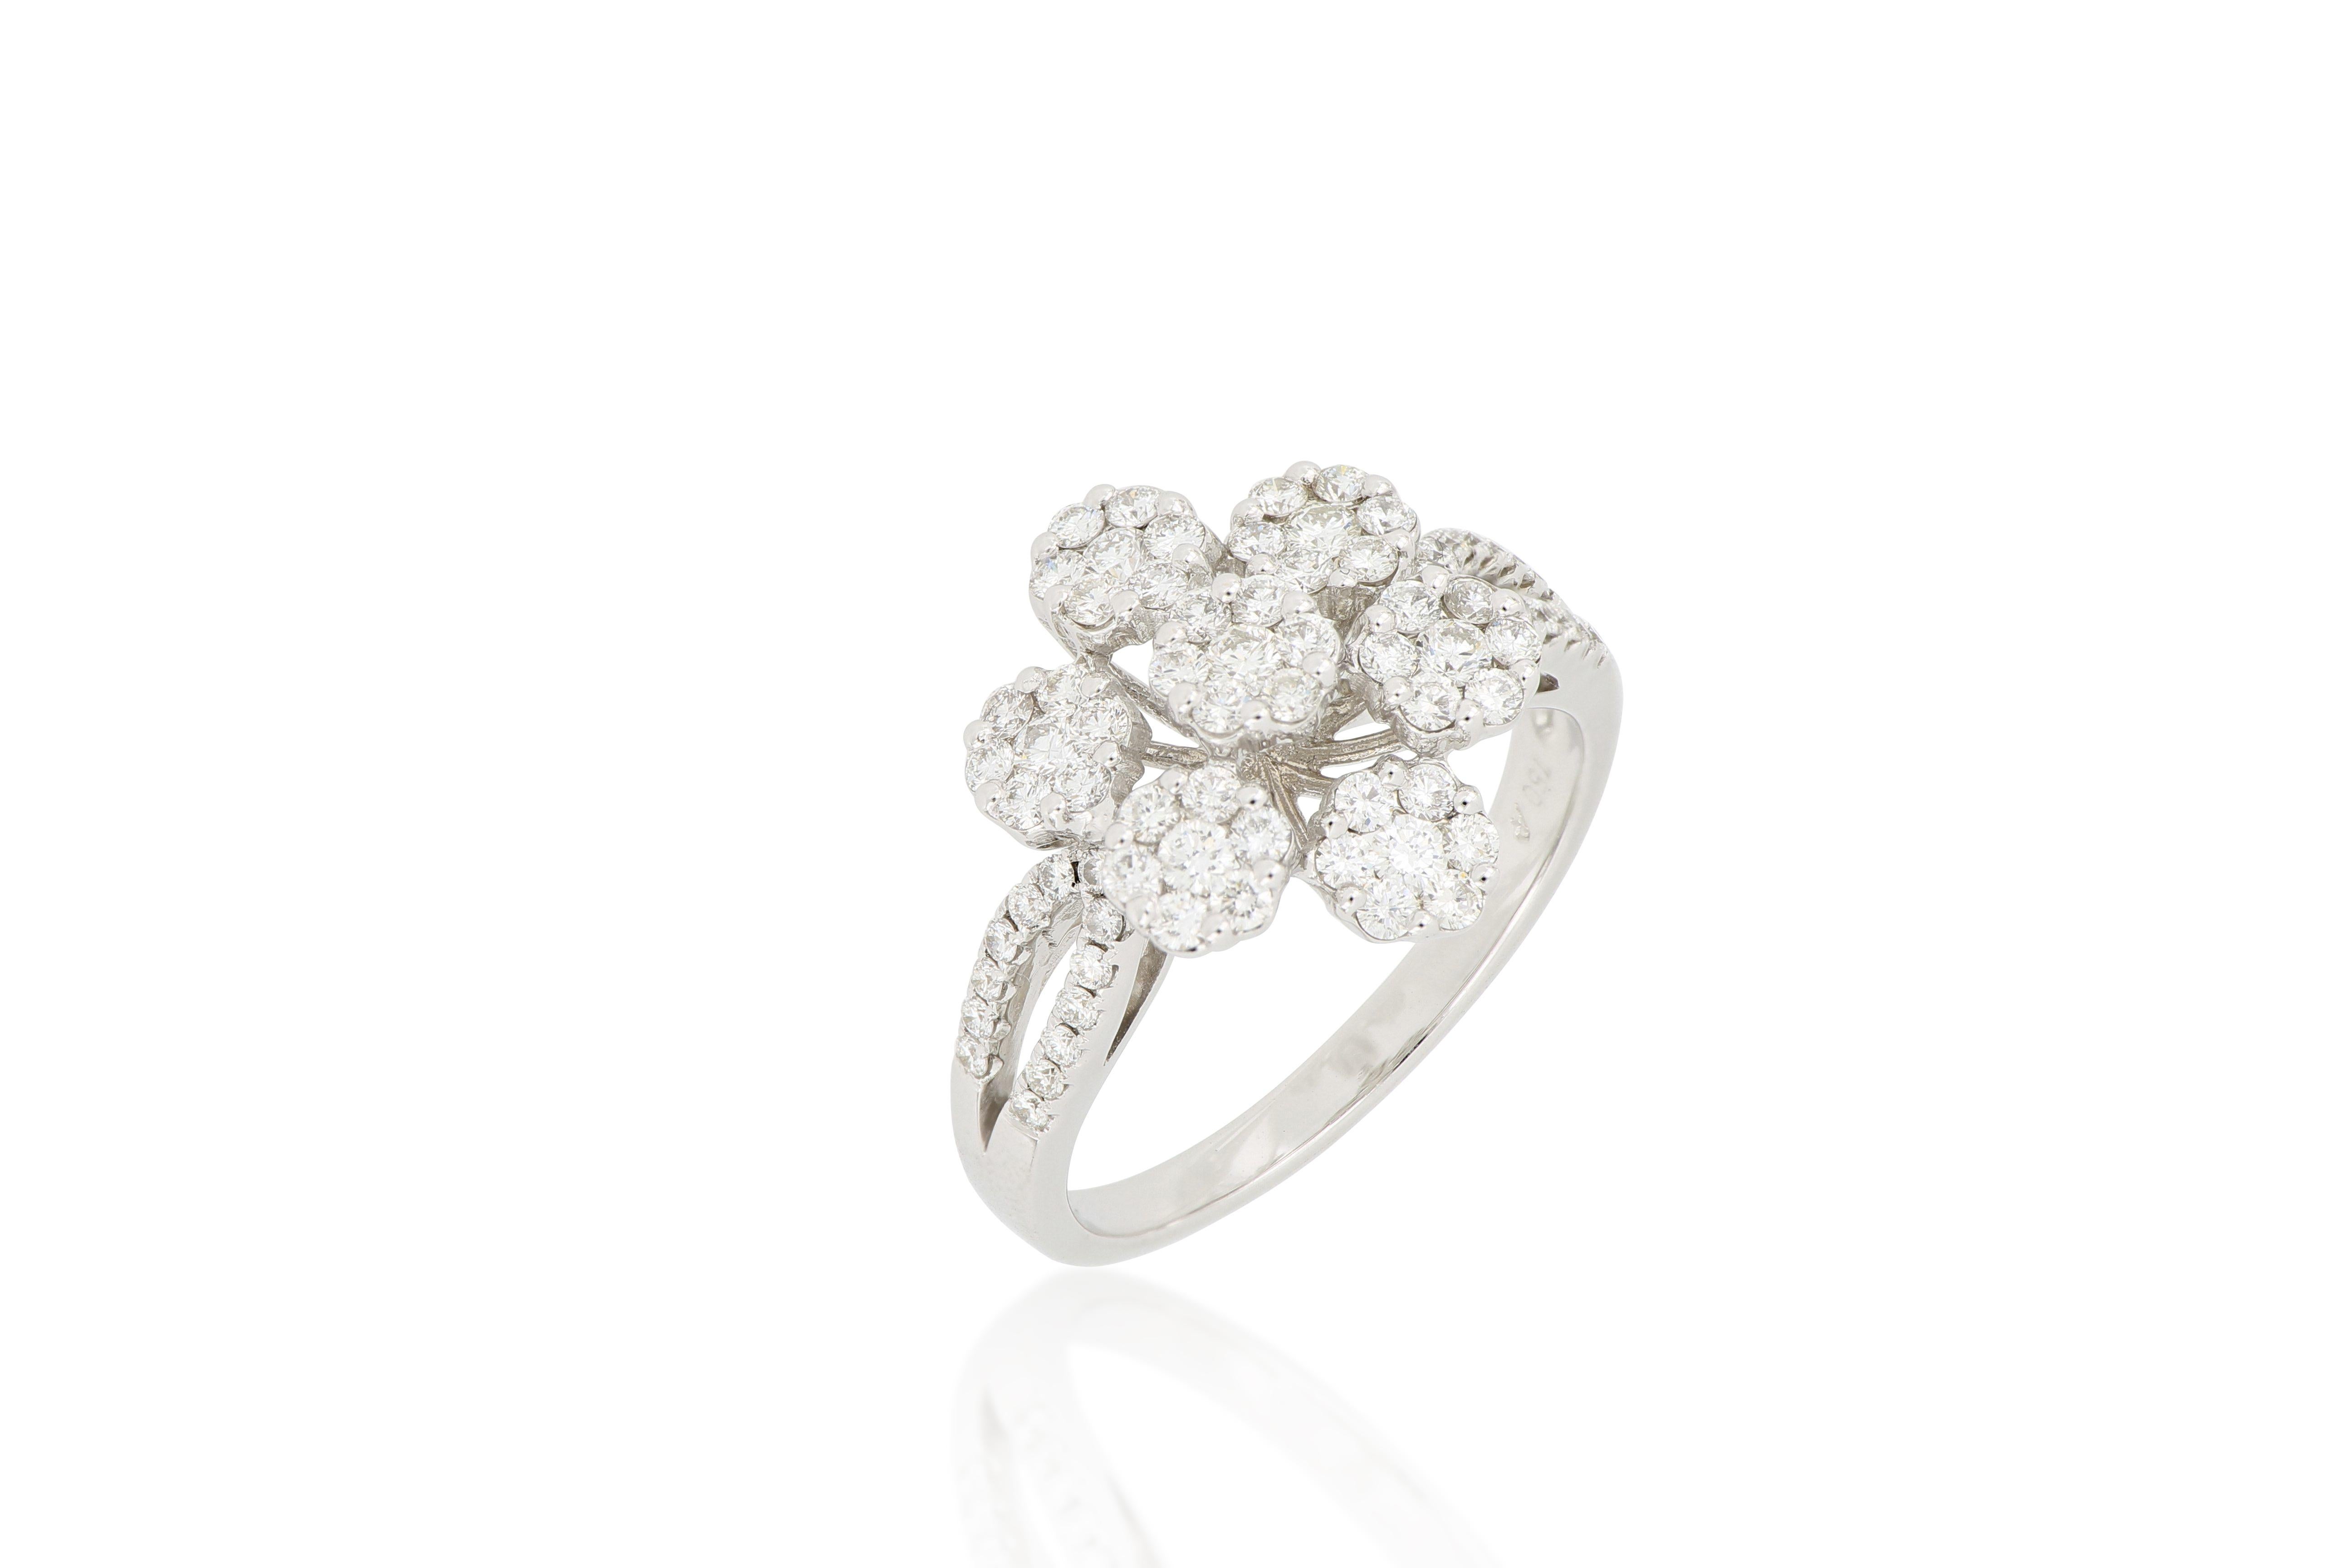 A diamond ring, designed in a floral pattern , set with brilliant-cut diamonds weighing approximately 1.12 carats, mounted in 18 Karat white gold.
A beautiful ring which can be worn for any occasion.
The brand is renowned for its high jewellery